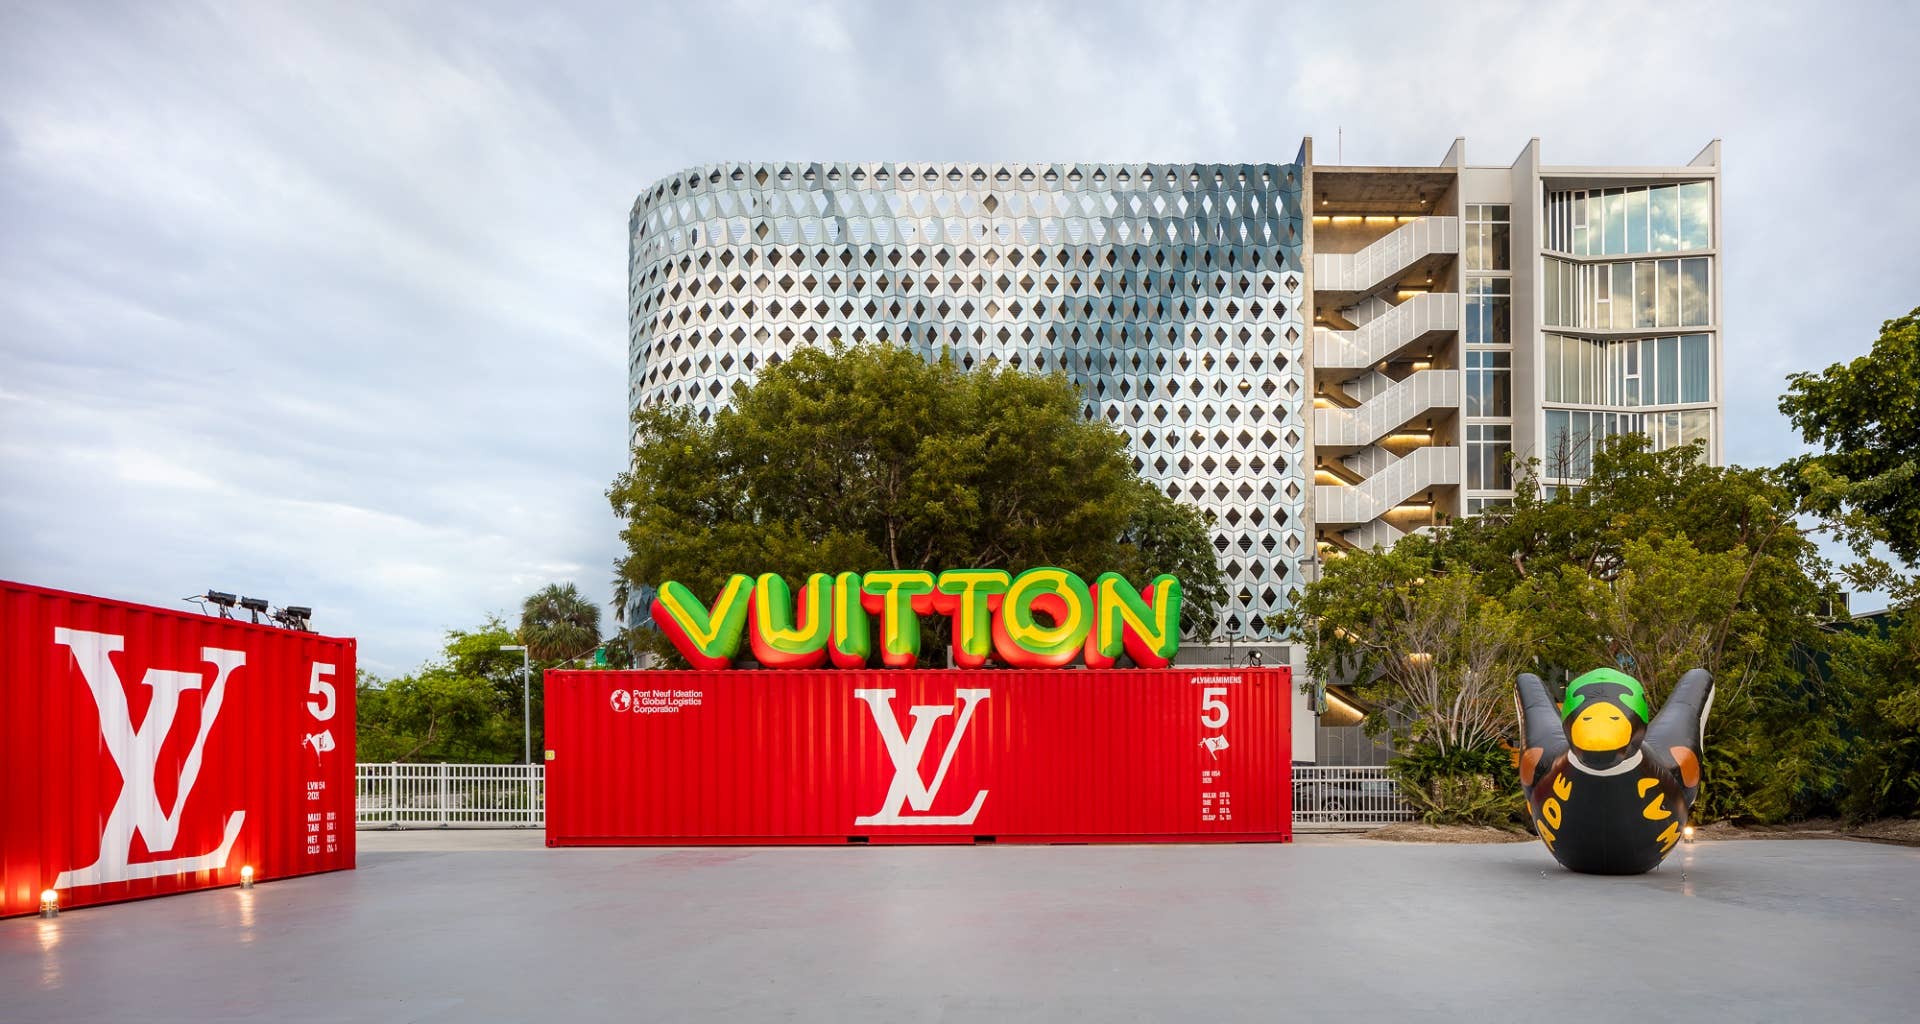 Louis Vuitton's Tokyo Tower Will be Amazing — The Outlet